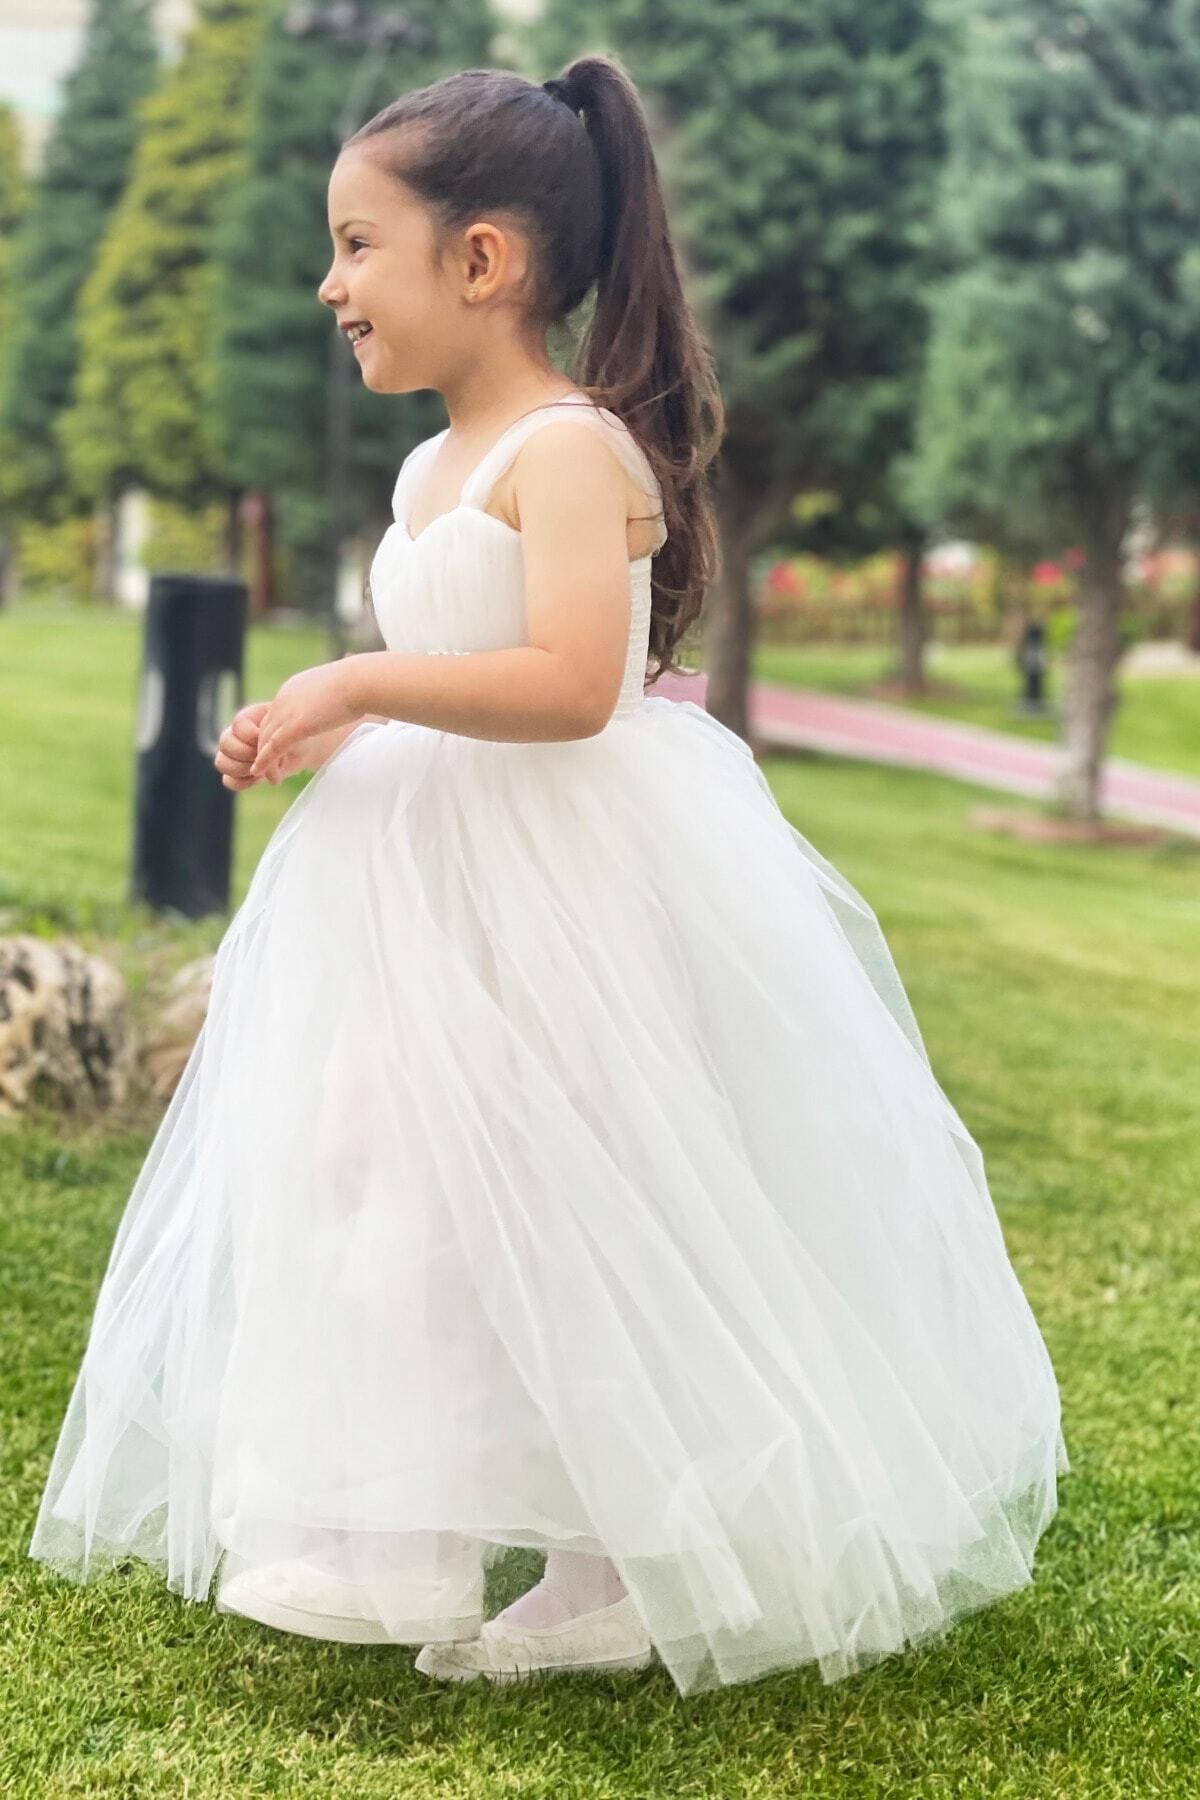 Girls Princess Dresses For Kids Tutu Lace Flower Bow Ball Gown Clothes  Children Wedding Party Evening Bridesmaid 11 12 Vestidos - AliExpress